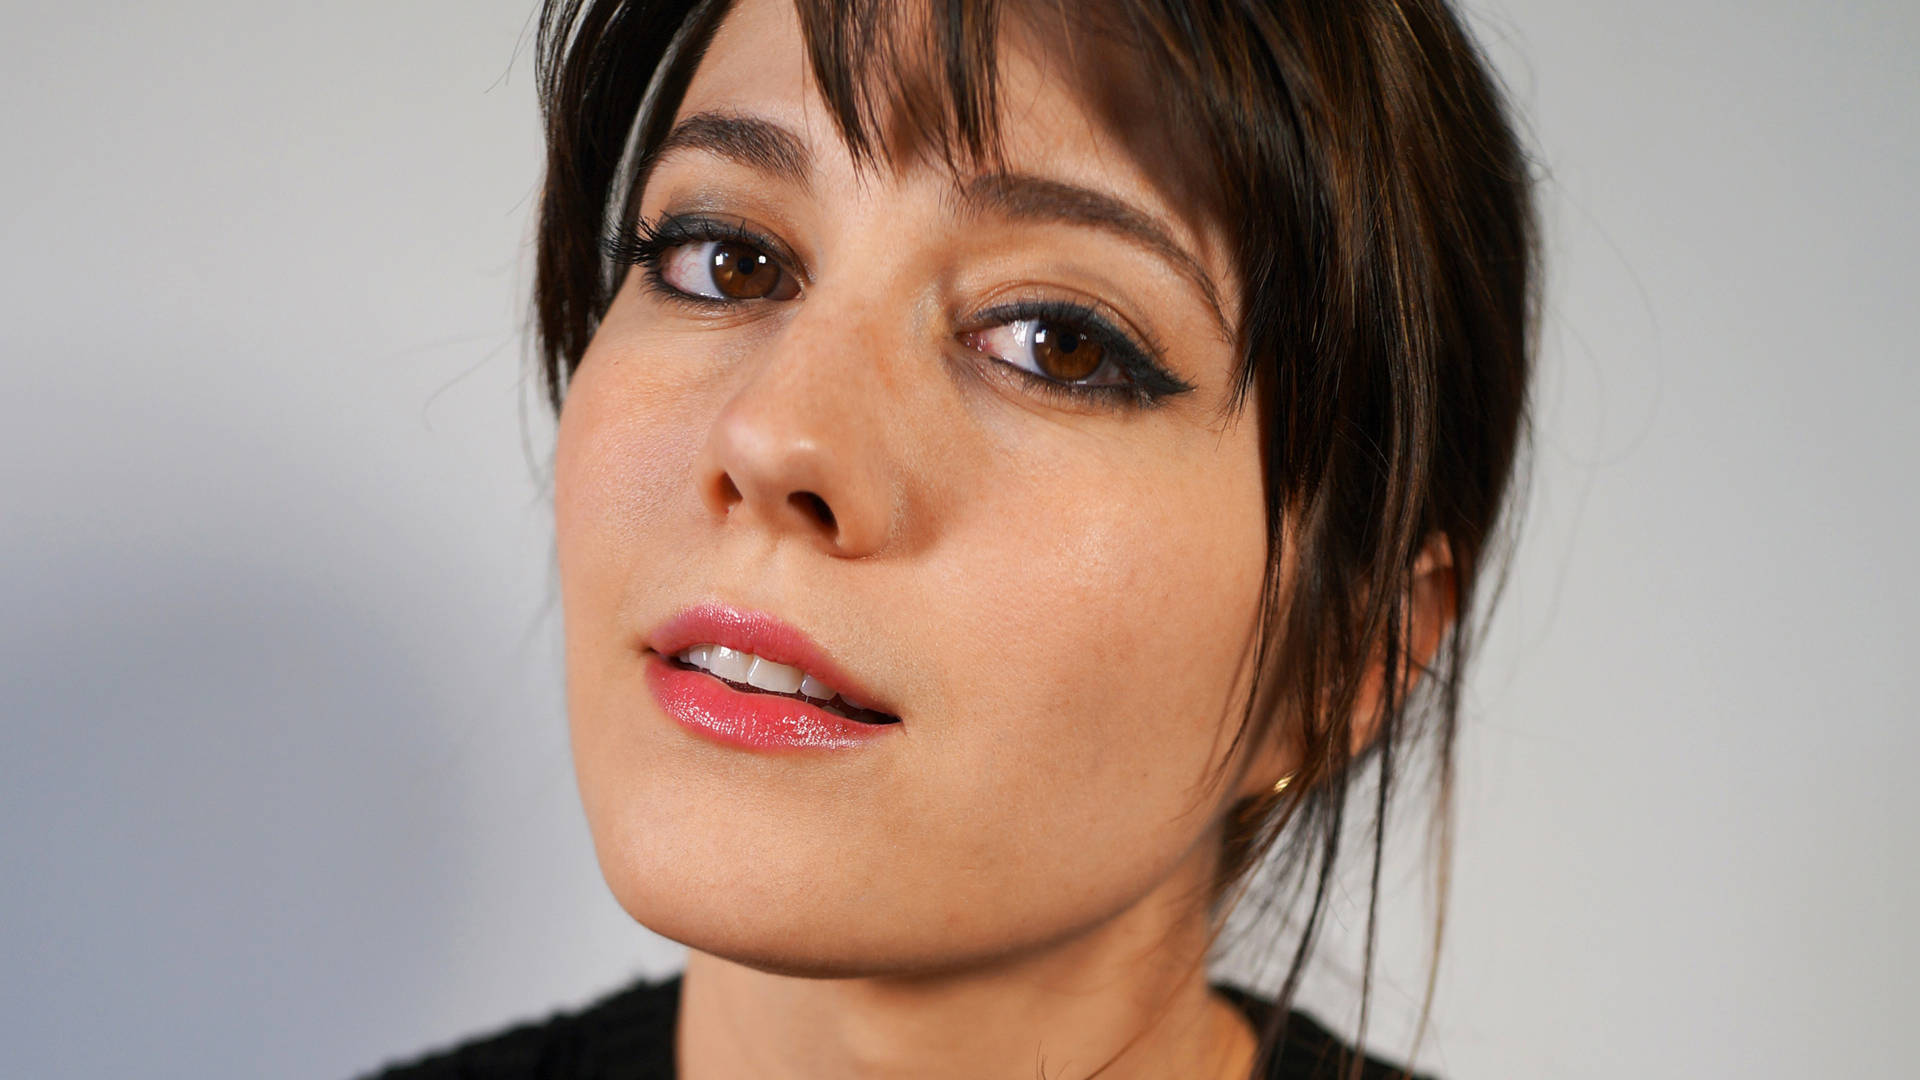 Top 999+ Mary Elizabeth Winstead Wallpapers Full HD, 4K Free to Use